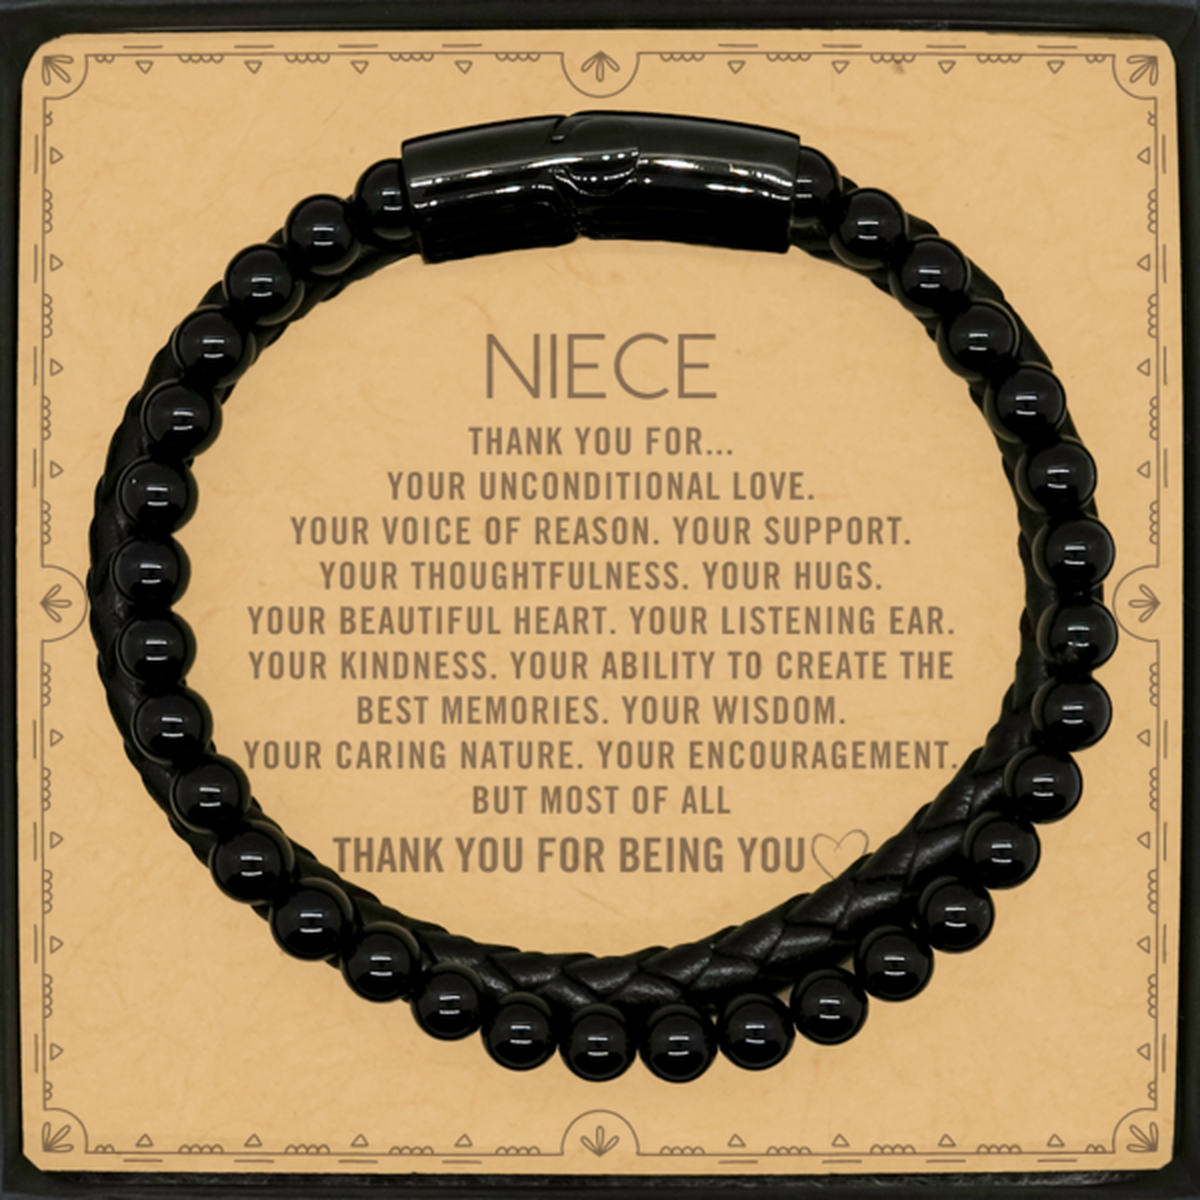 Niece Stone Leather Bracelets Custom, Message Card Gifts For Niece Christmas Graduation Birthday Gifts for Men Women Niece Thank you for Your unconditional love